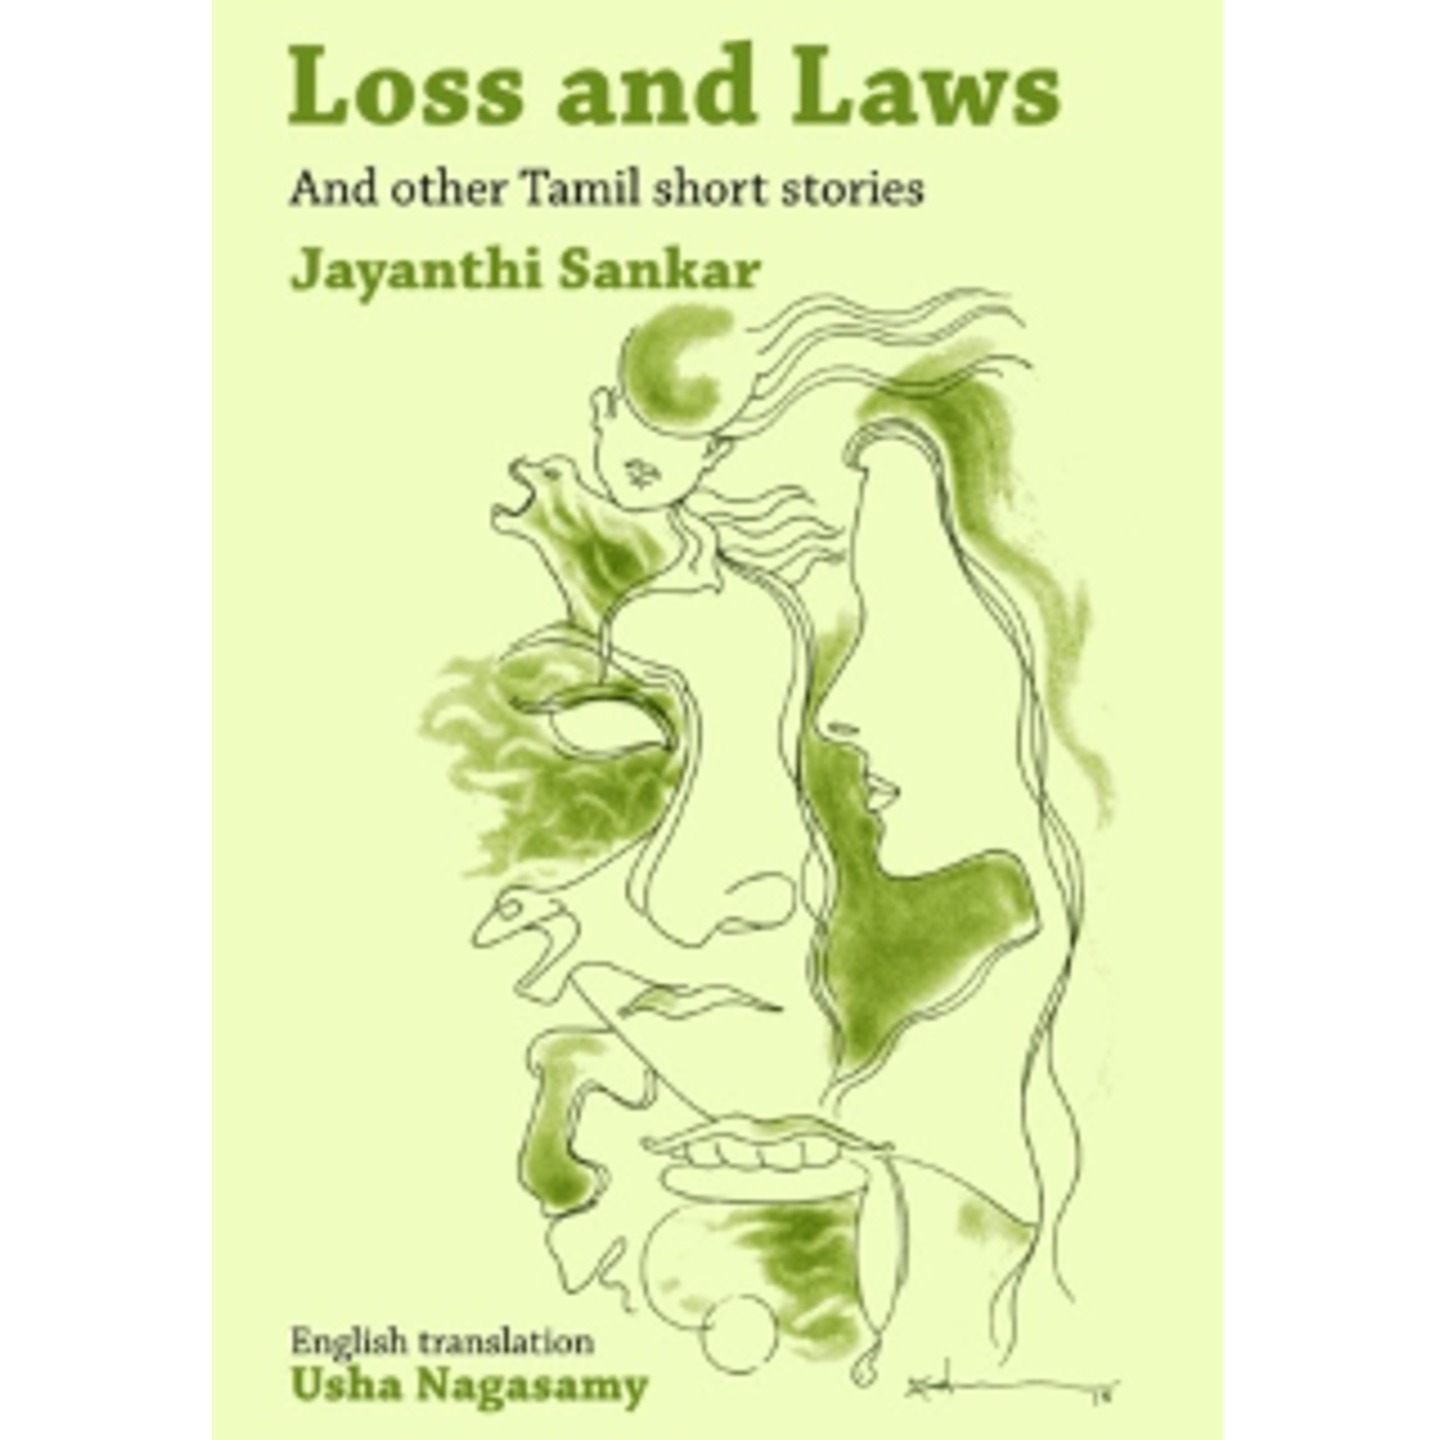 Loss and Laws and Other Tamil Short Stories by Jayanthi Sankar